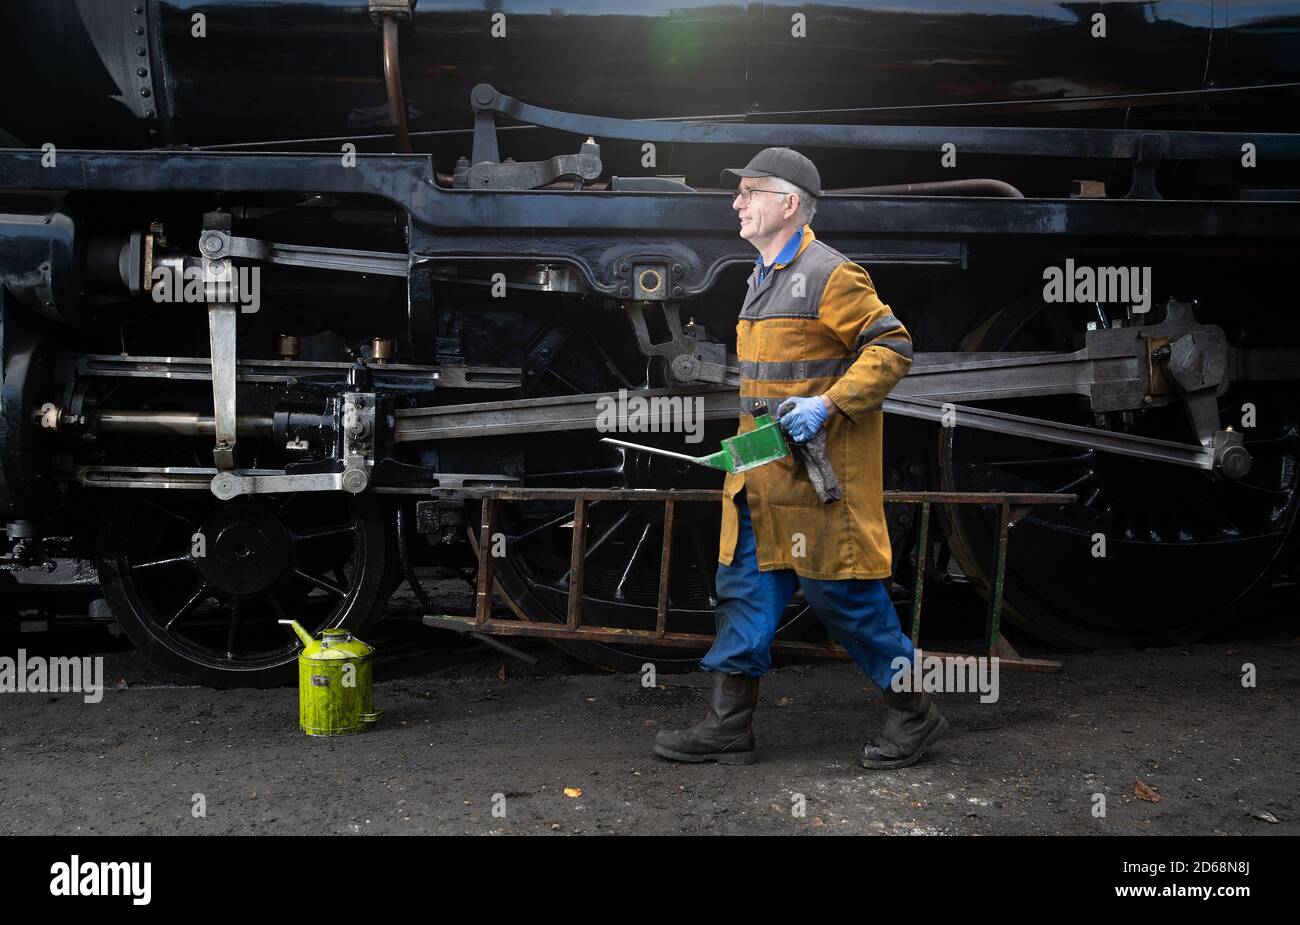 A volunteer oils on the S15 class steam locomotive 506 at Ropley station ahead of this weekend's Autumn Steam Gala on the Mid Hants Railway's Watercress Line. Stock Photo